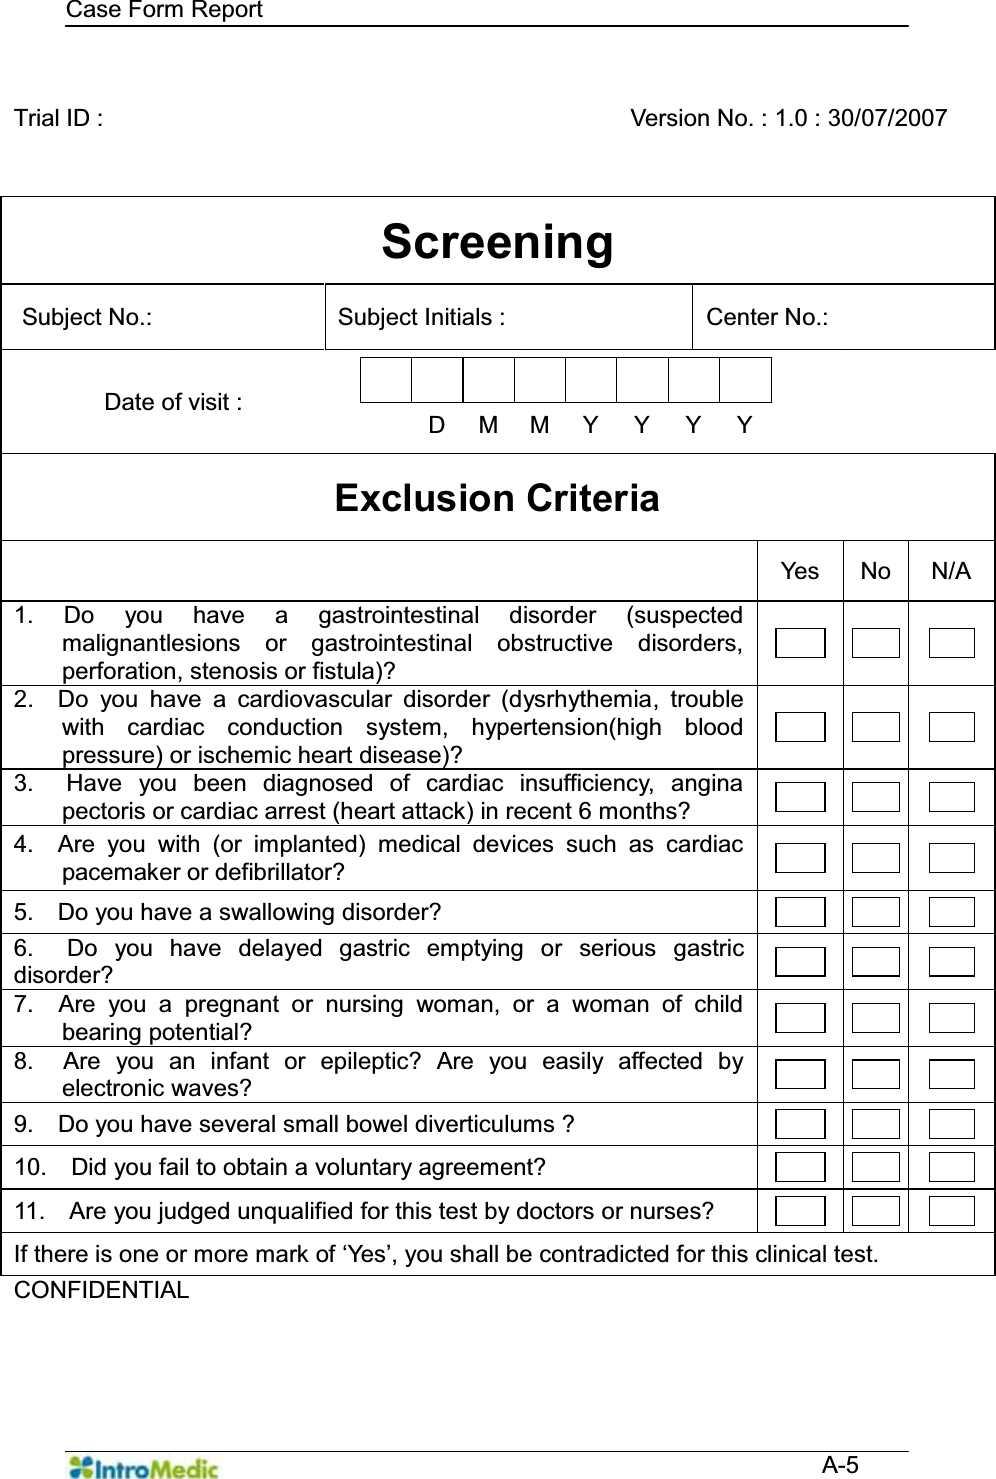   Case Form Report  A-5  Trial ID :      Version No. : 1.0 : 30/07/2007 Screening Subject No.:    Subject Initials :    Center No.:   Date of visit :             D M M Y Y Y Y  Exclusion Criteria  Yes No N/A 1. Do you have a gastrointestinal disorder (suspected malignantlesions or gastrointestinal obstructive disorders, perforation, stenosis or fistula)?       2.  Do you have a cardiovascular disorder (dysrhythemia, trouble with cardiac conduction system, hypertension(high blood pressure) or ischemic heart disease)?       3.  Have you been diagnosed of cardiac insufficiency, angina pectoris or cardiac arrest (heart attack) in recent 6 months?        4.  Are you with (or implanted) medical devices such as cardiac pacemaker or defibrillator?        5.    Do you have a swallowing disorder?        6.  Do you have delayed gastric emptying or serious gastric disorder?        7.  Are you a pregnant or nursing woman, or a woman of child bearing potential?        8.  Are you an infant or epileptic? Are you easily affected by electronic waves?        9.    Do you have several small bowel diverticulums ?        10.    Did you fail to obtain a voluntary agreement?        11.    Are you judged unqualified for this test by doctors or nurses?        ,IWKHUHLVRQHRUPRUHPDUNRIµ&lt;HV¶\RXVKDOOEHFRQWUDGLFWHGIRUWKLVFOLQLFDOWHVW CONFIDENTIAL     